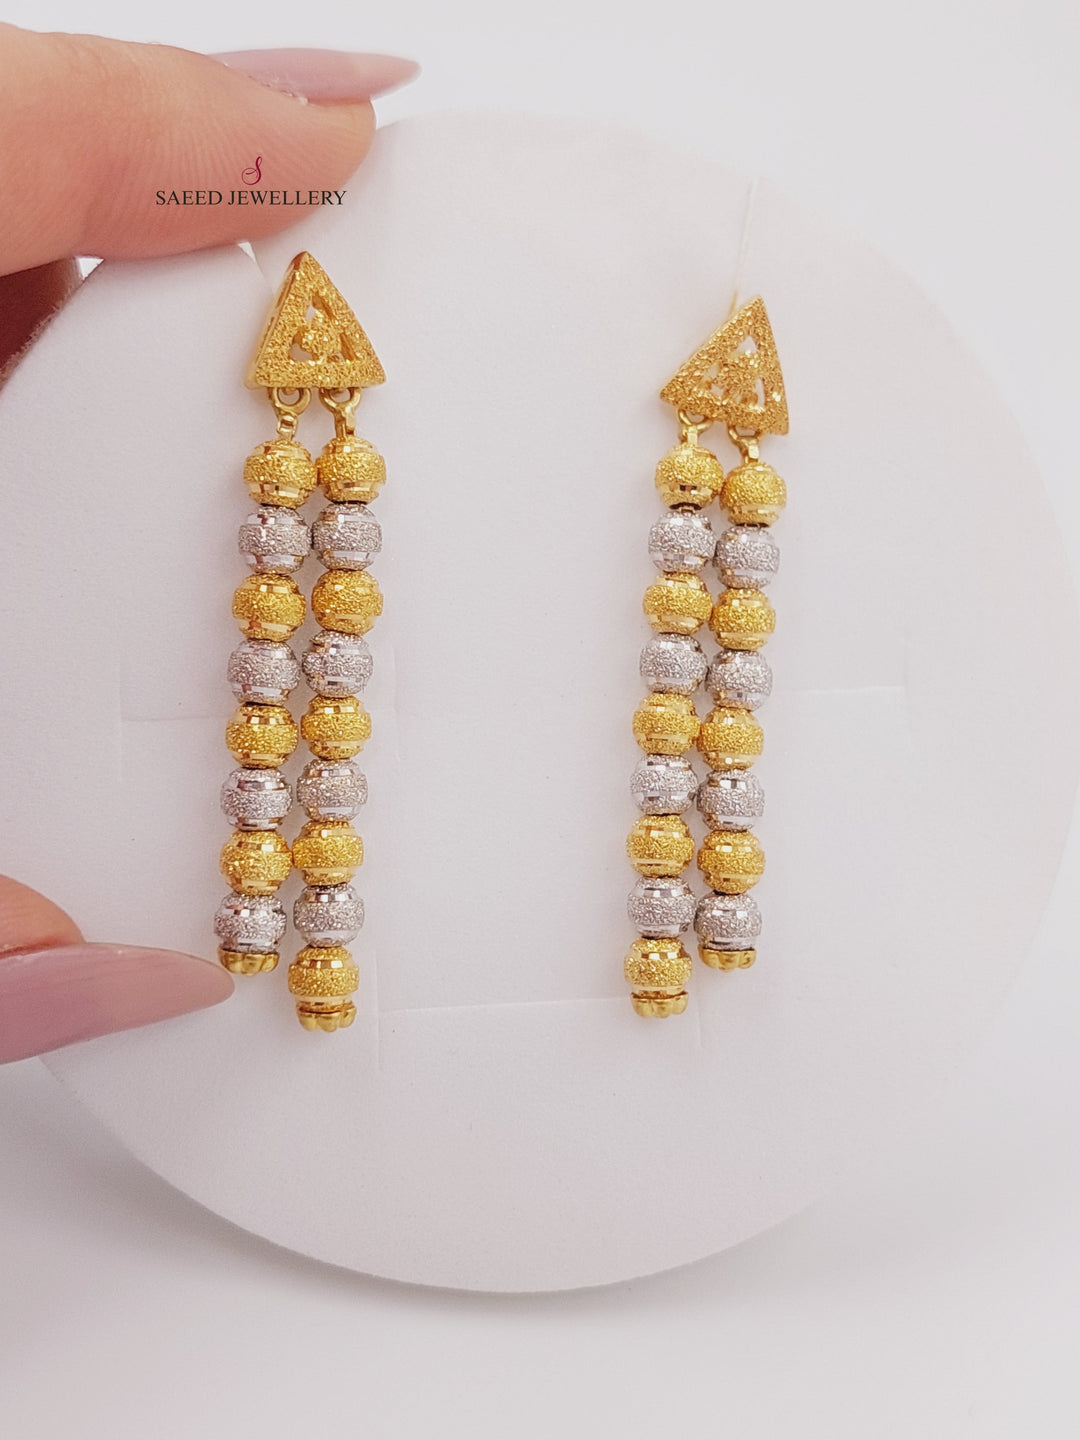 21K Fancy Earrings Made of 21K Yellow Gold by Saeed Jewelry-حلق-اكسترا-19